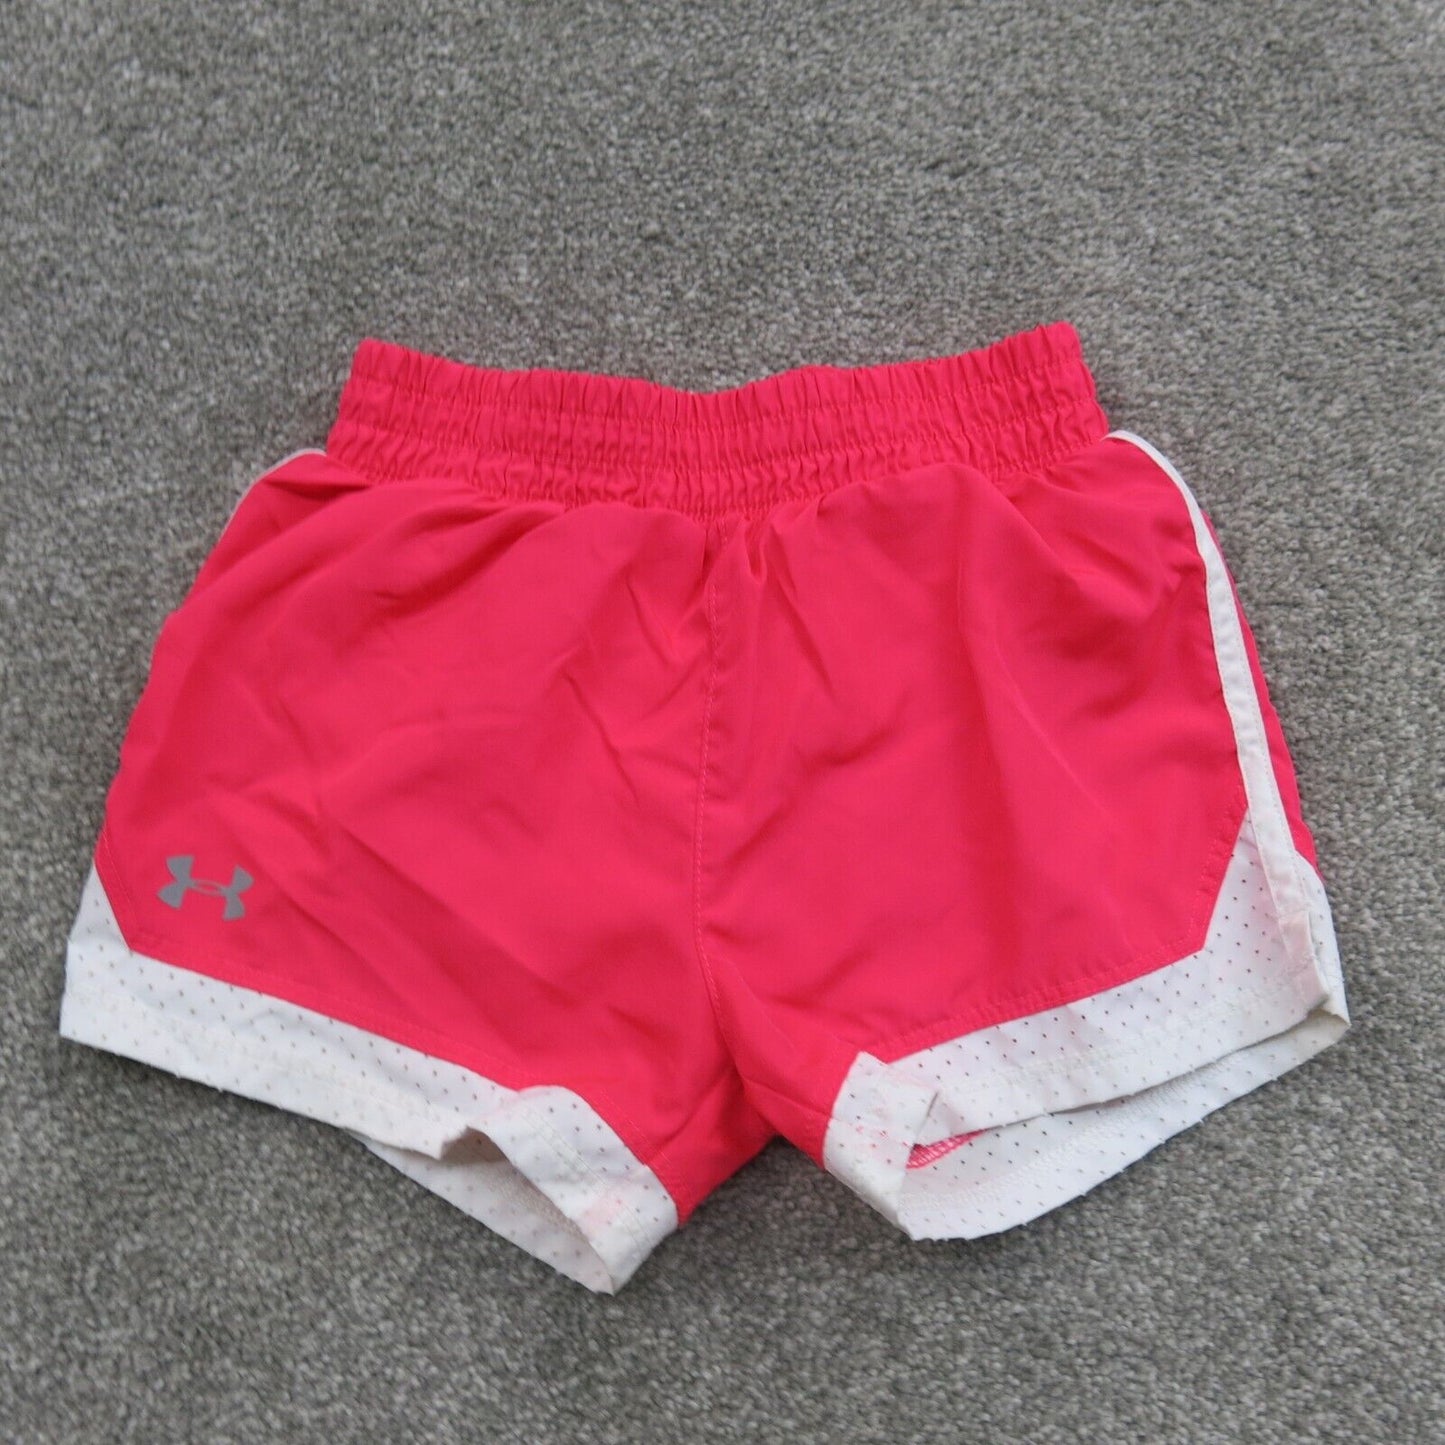 Under Armour Shorts Girls Size 4T Pink Solid Running & Jogging Athleti –  Goodfair